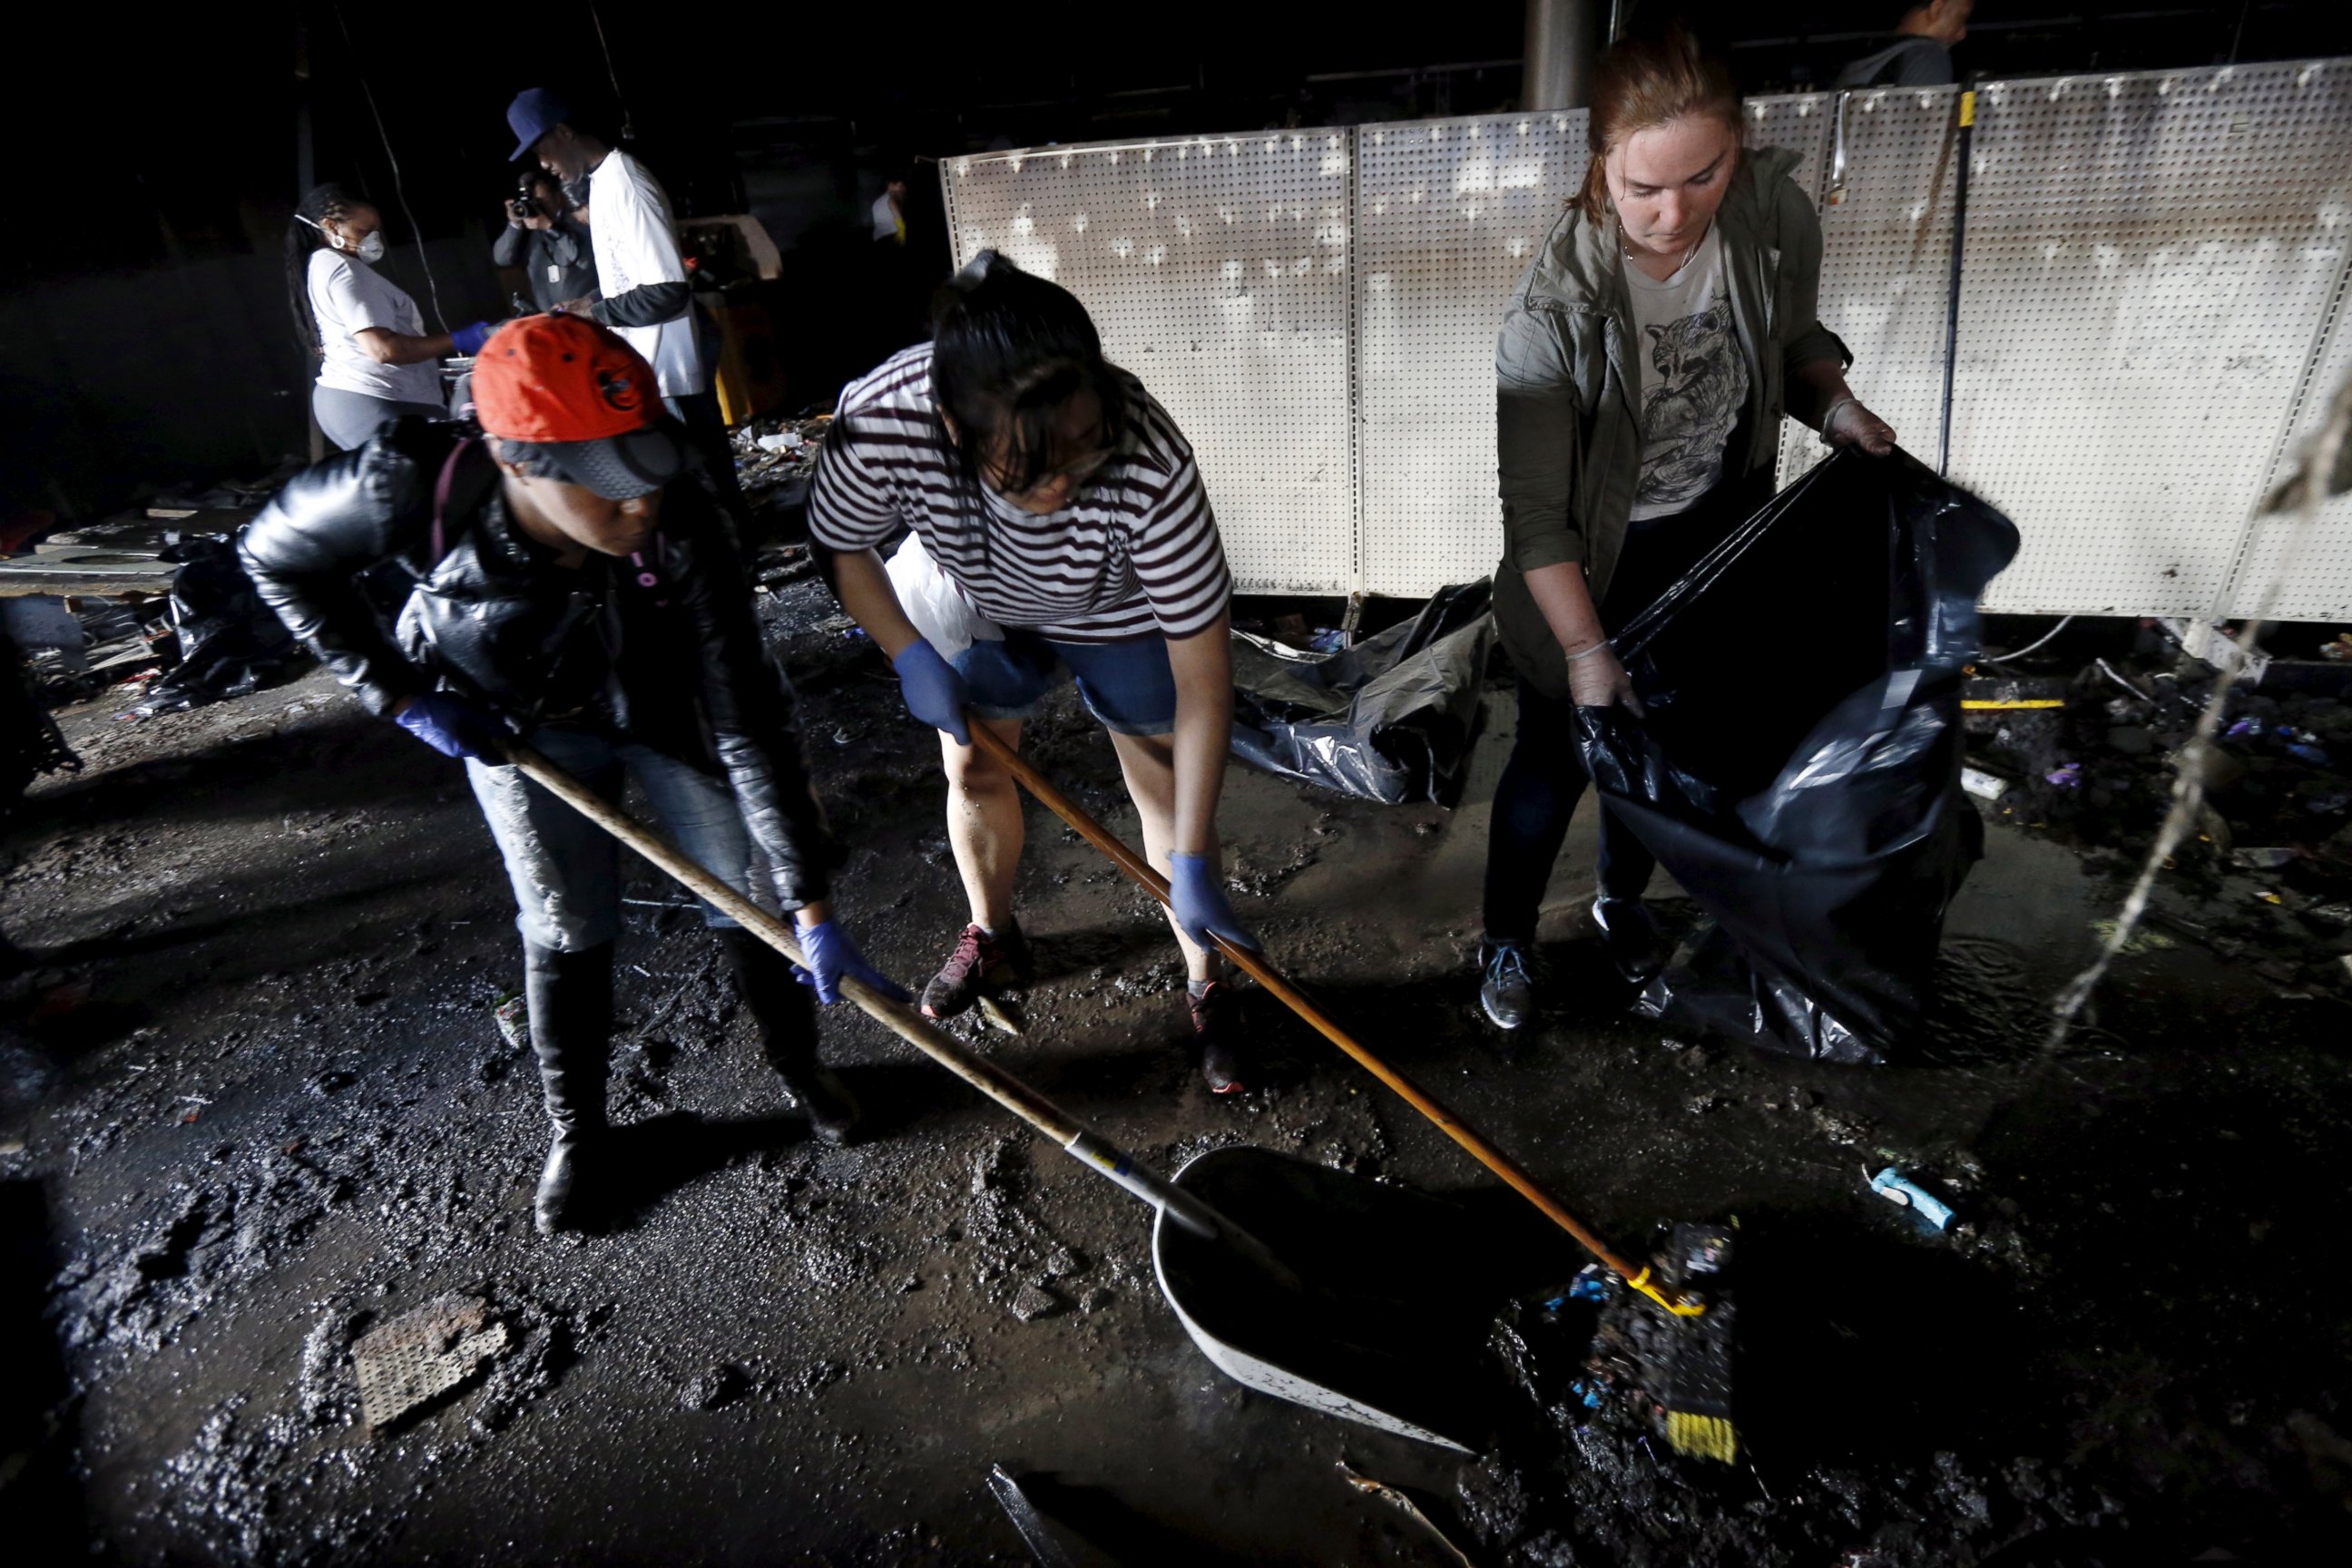 PHOTO: Members of the community clean up a recently looted and burned CVS store amid concerns about the building's stability in Baltimore, April 28, 2015.